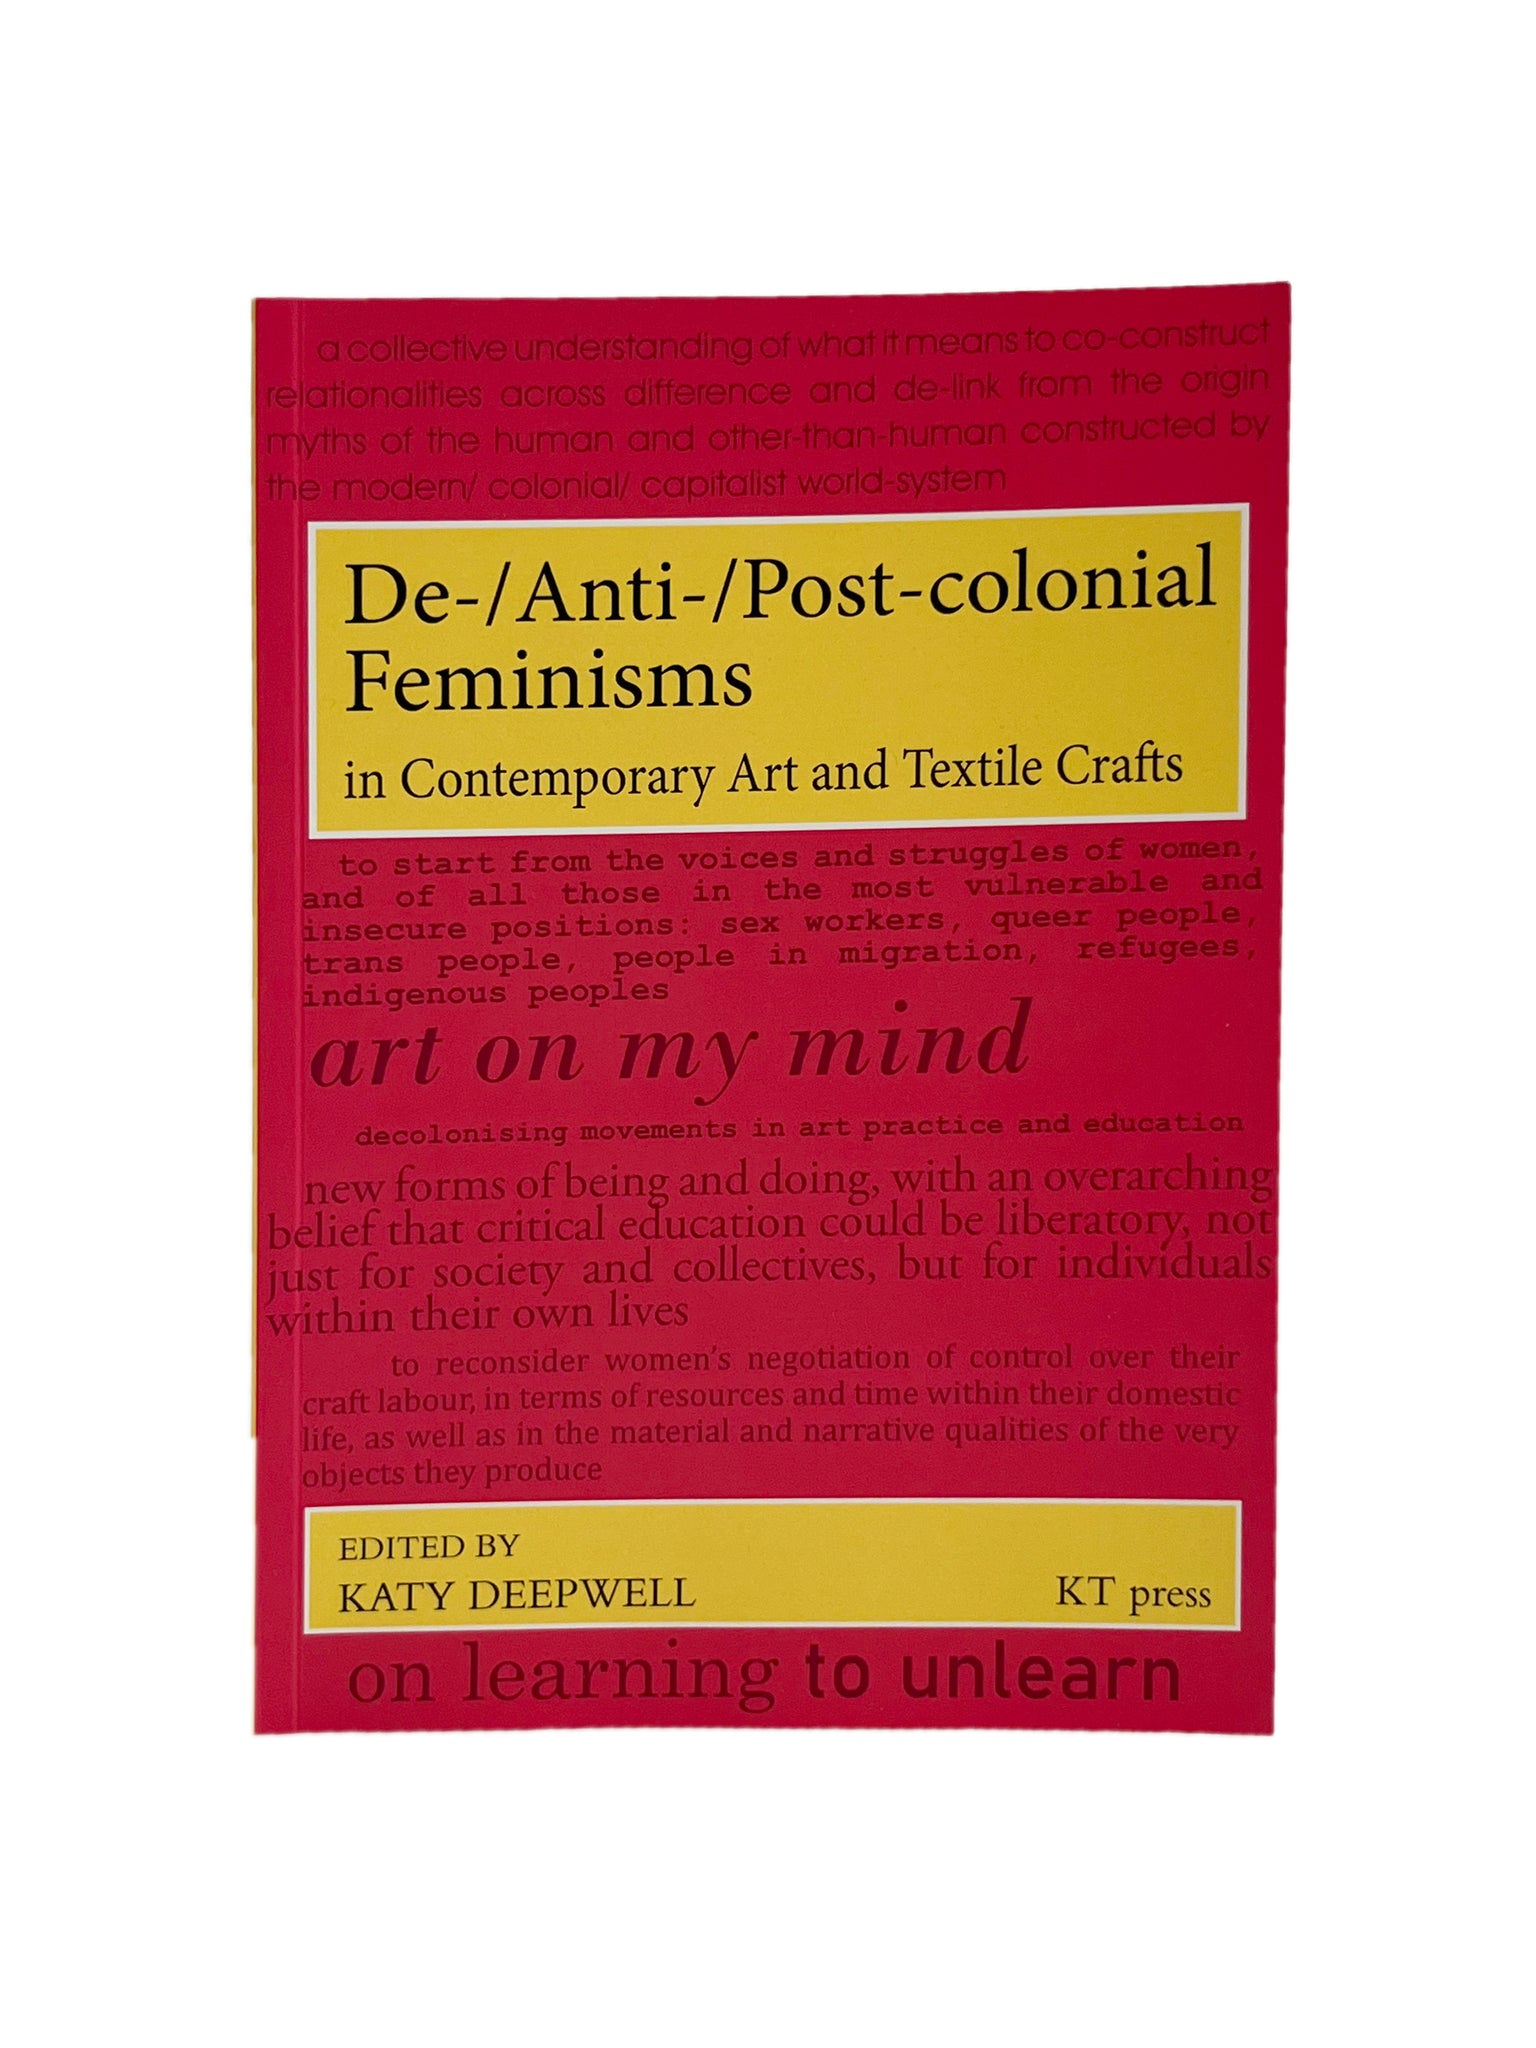 De-/Anti-/Post-colonial Feminisms in Contemporary Art and Textile Crafts